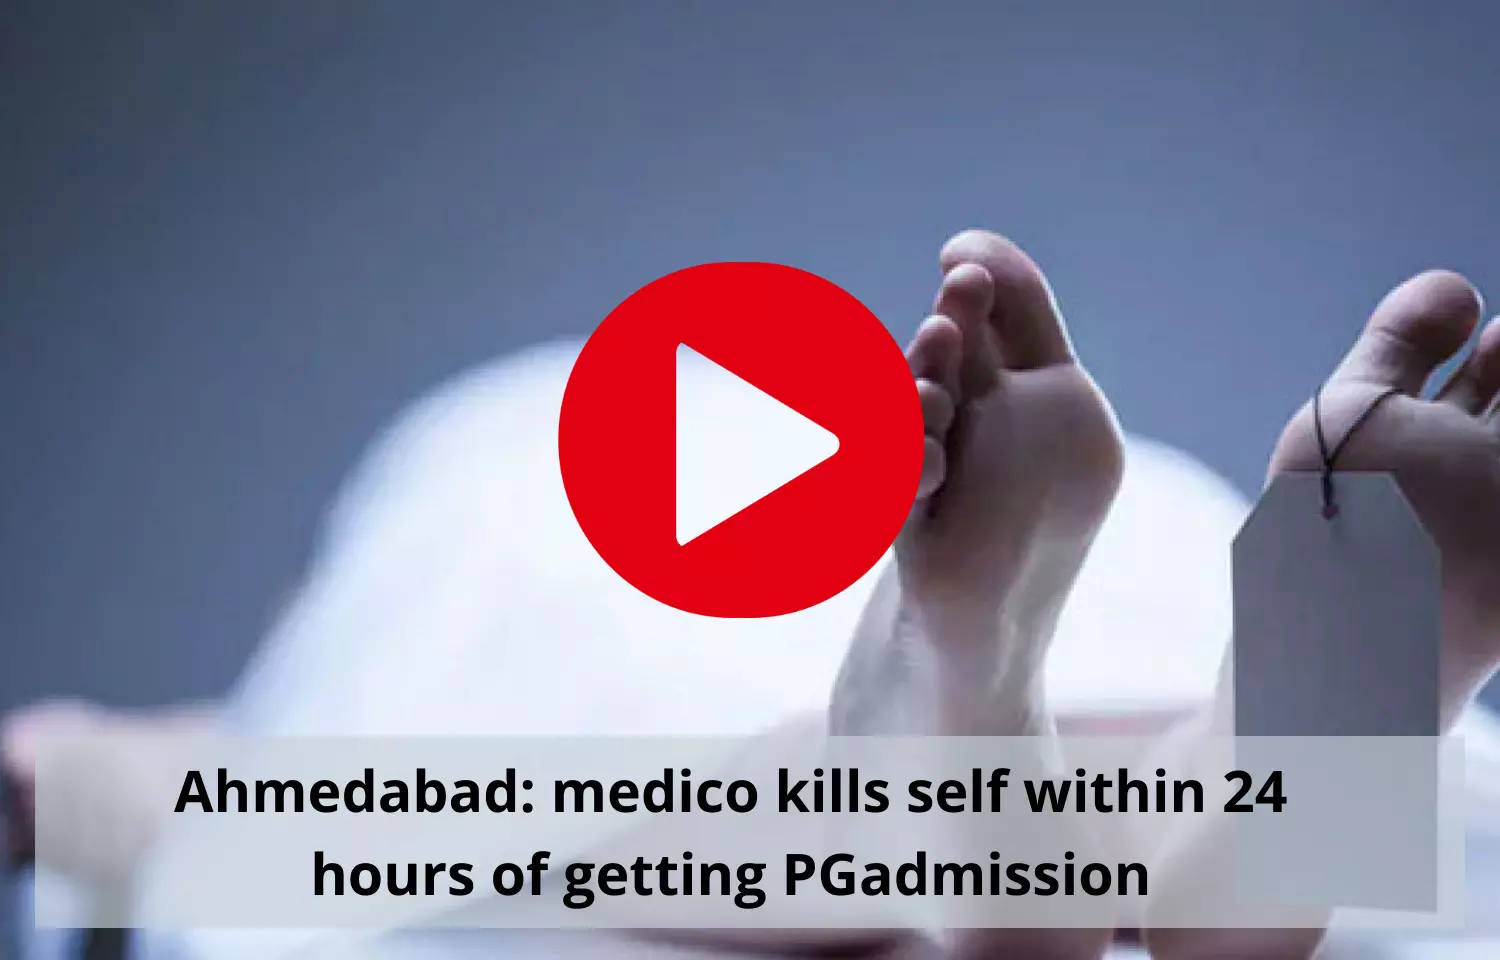 Ahmedabad Medico kills self within 24 hours of getting PG admission